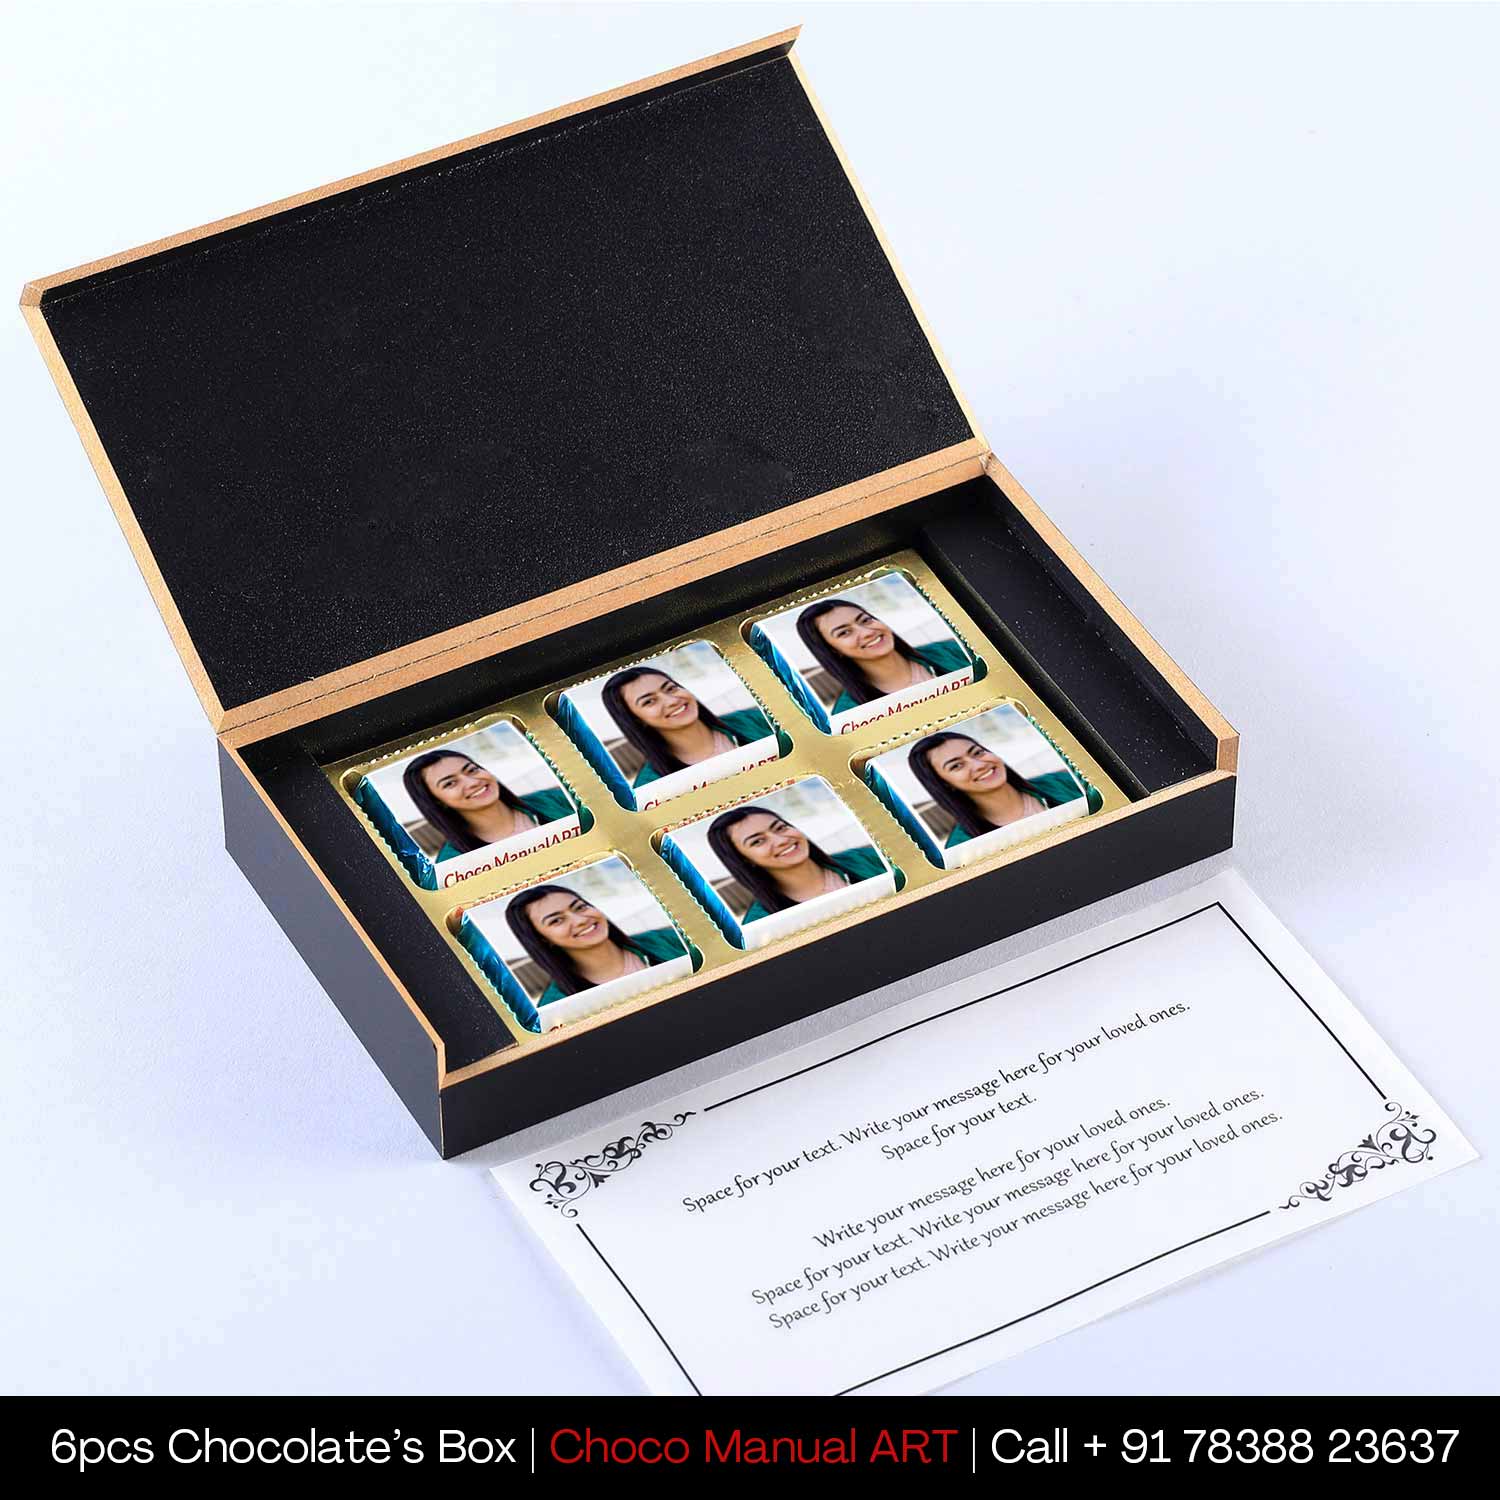 Employees' Birthday gift with personalization I Wooden packaging I Chocolate gift box